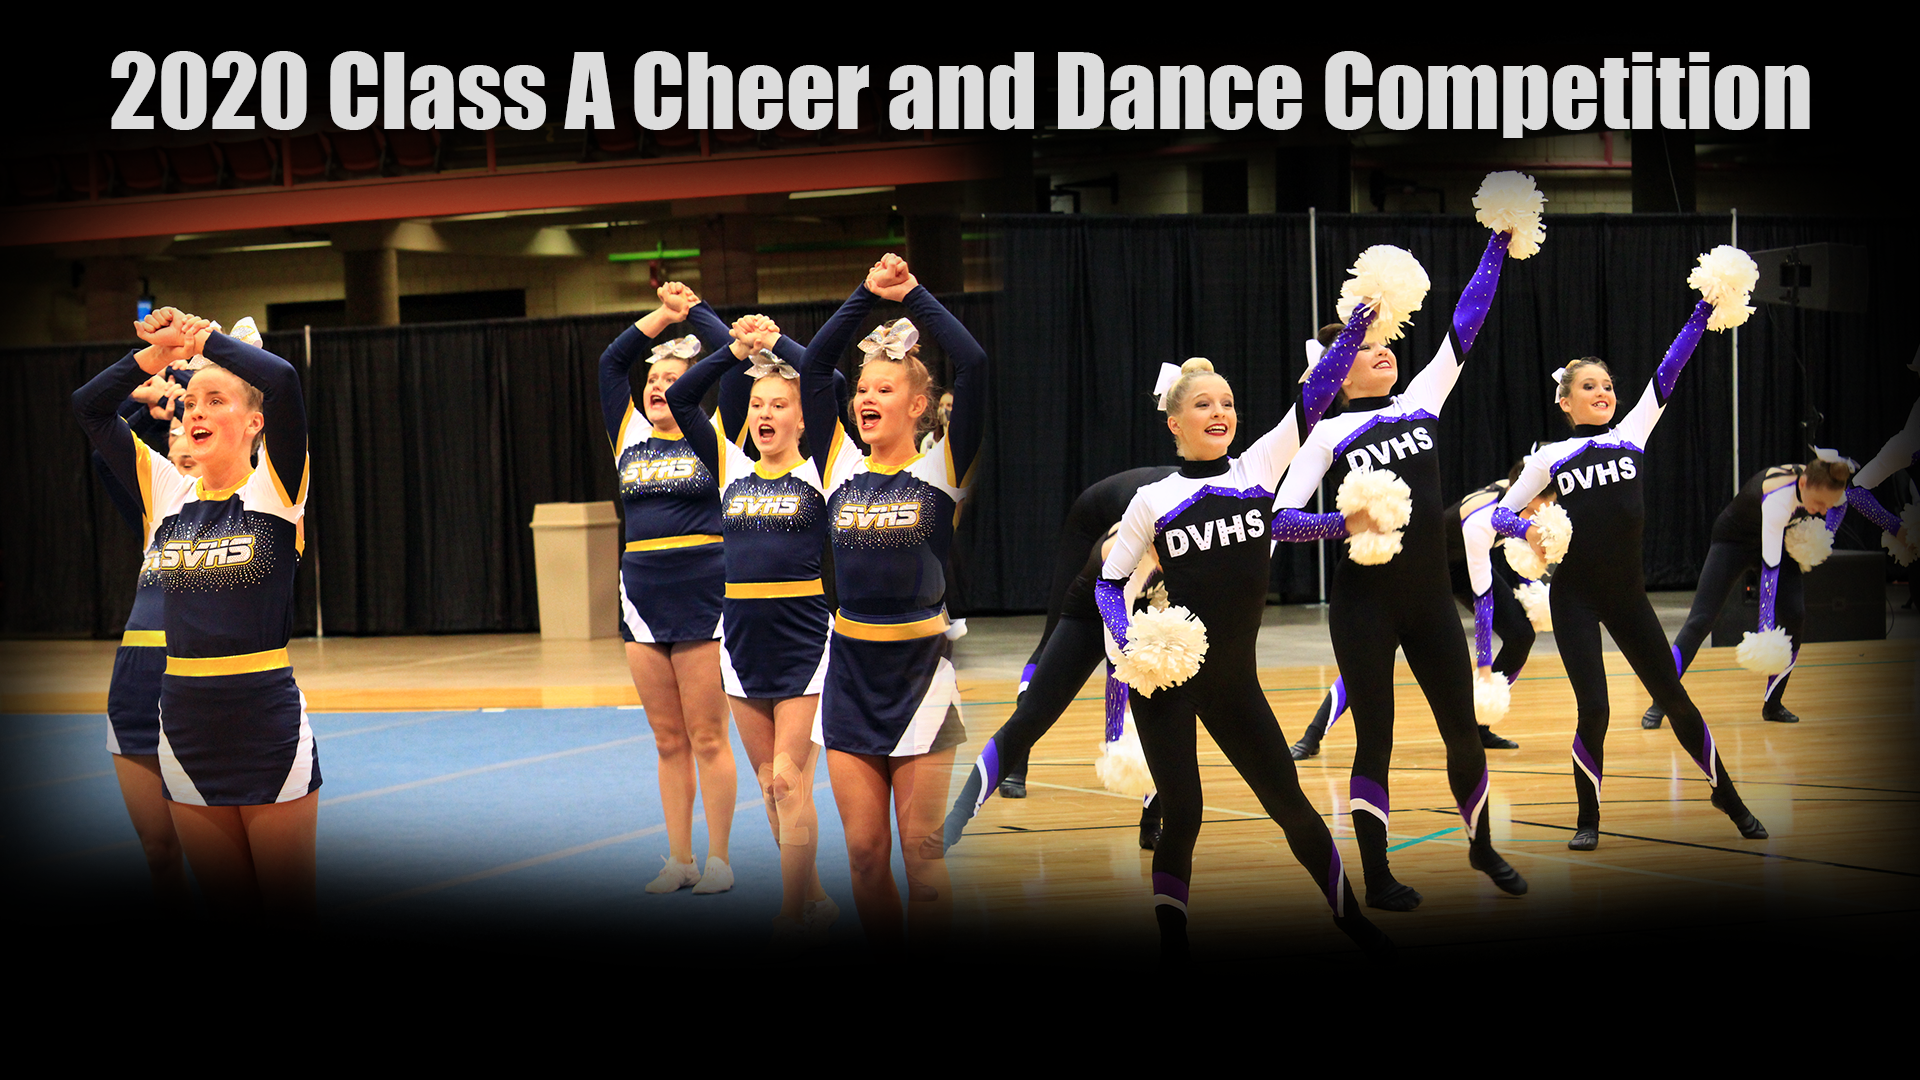 2020 Class A Cheer and Dance Competition